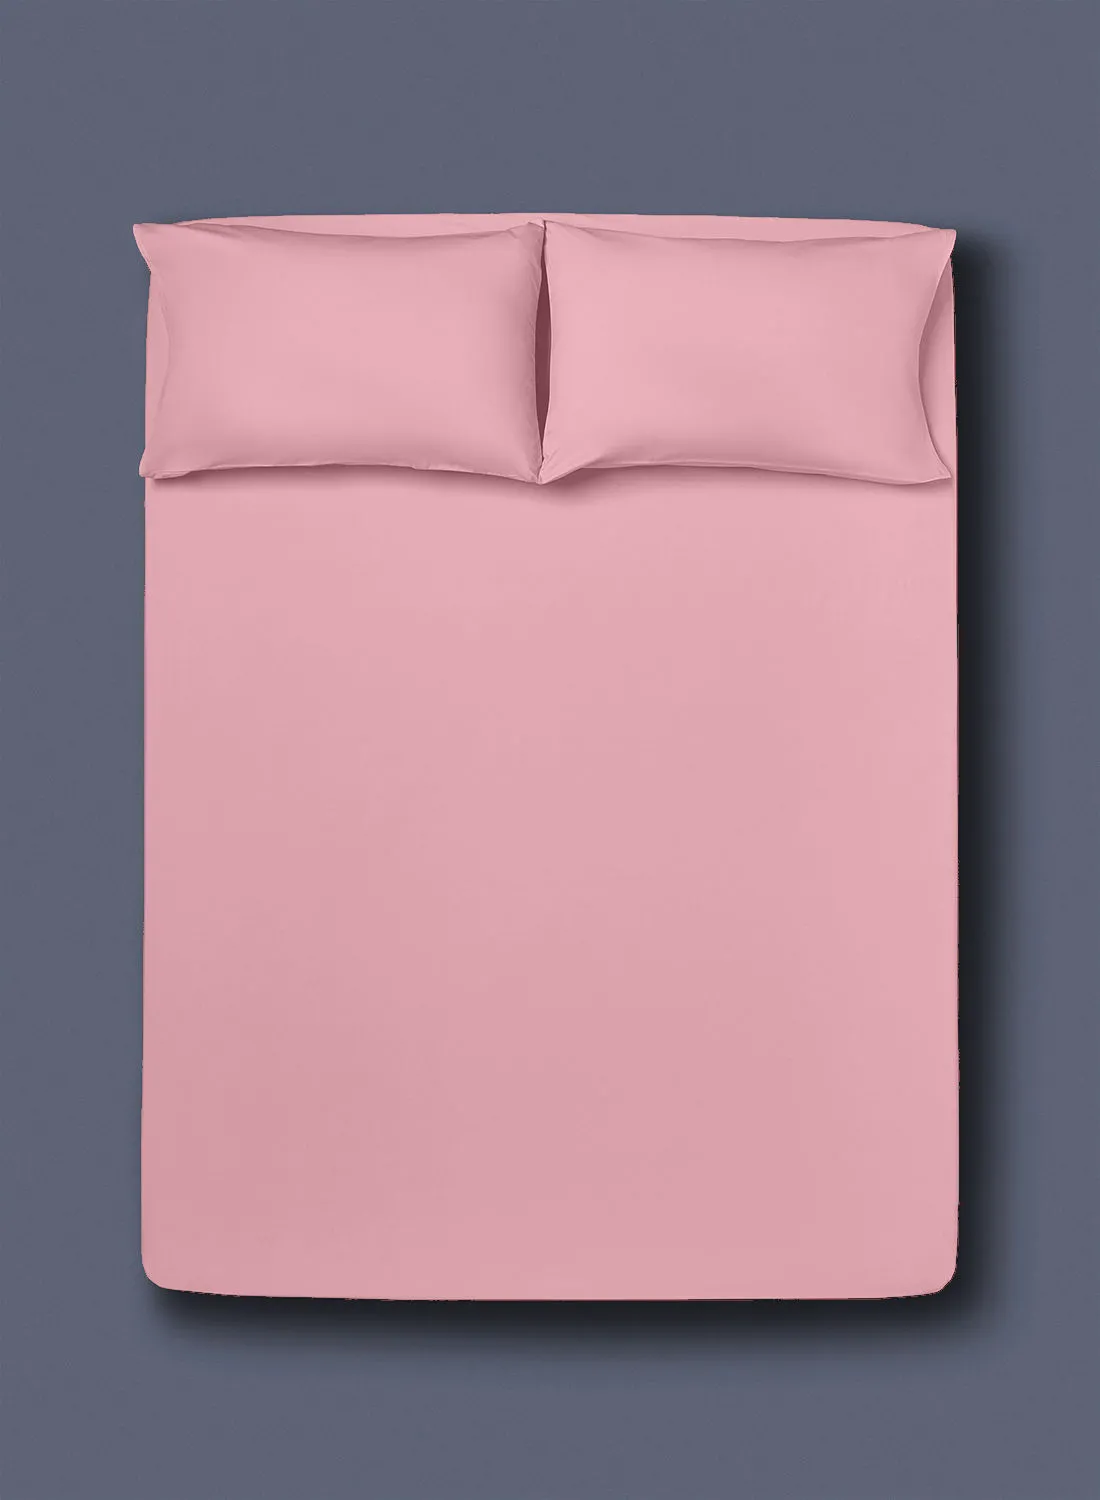 Amal Fitted Bedsheet Set Queen Size  100% Cotton Light Weight Everyday Use 144 TC High Quality 1 Bed Sheet And 2 Pillow Cases Pink Color